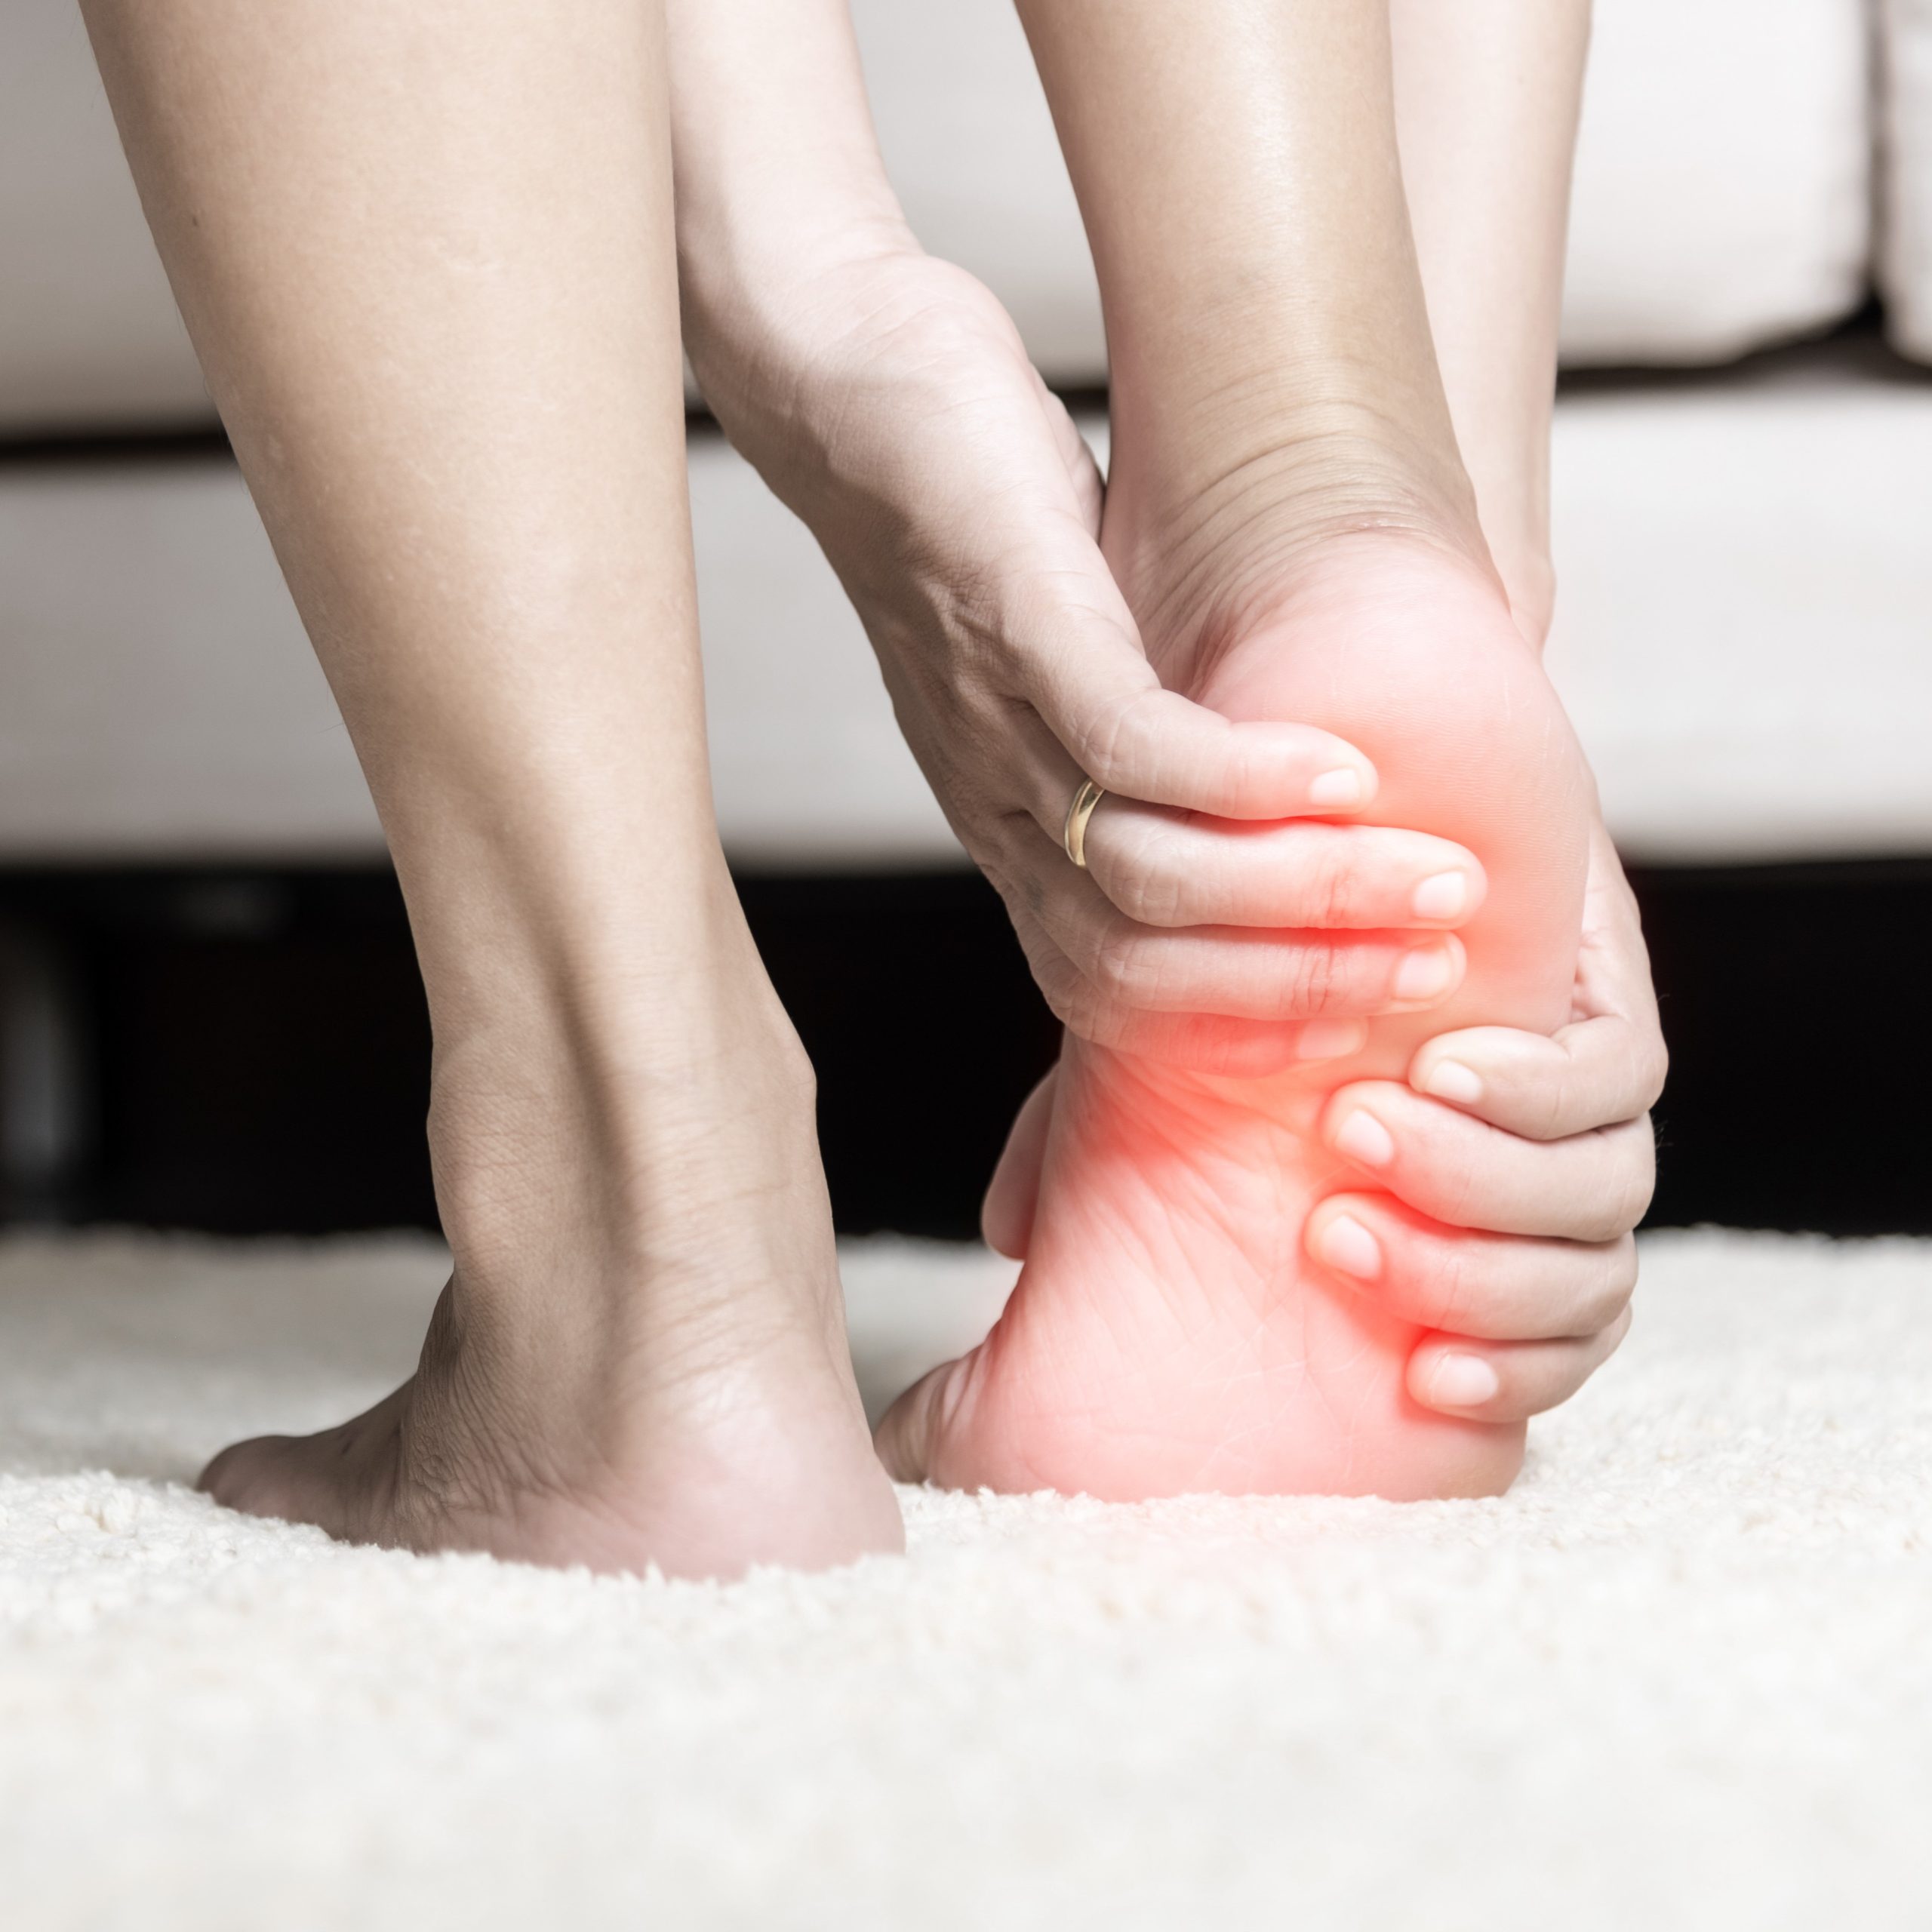 Plantar fasciitis: A common cause of heel and foot pain - Dulwich Podiatry